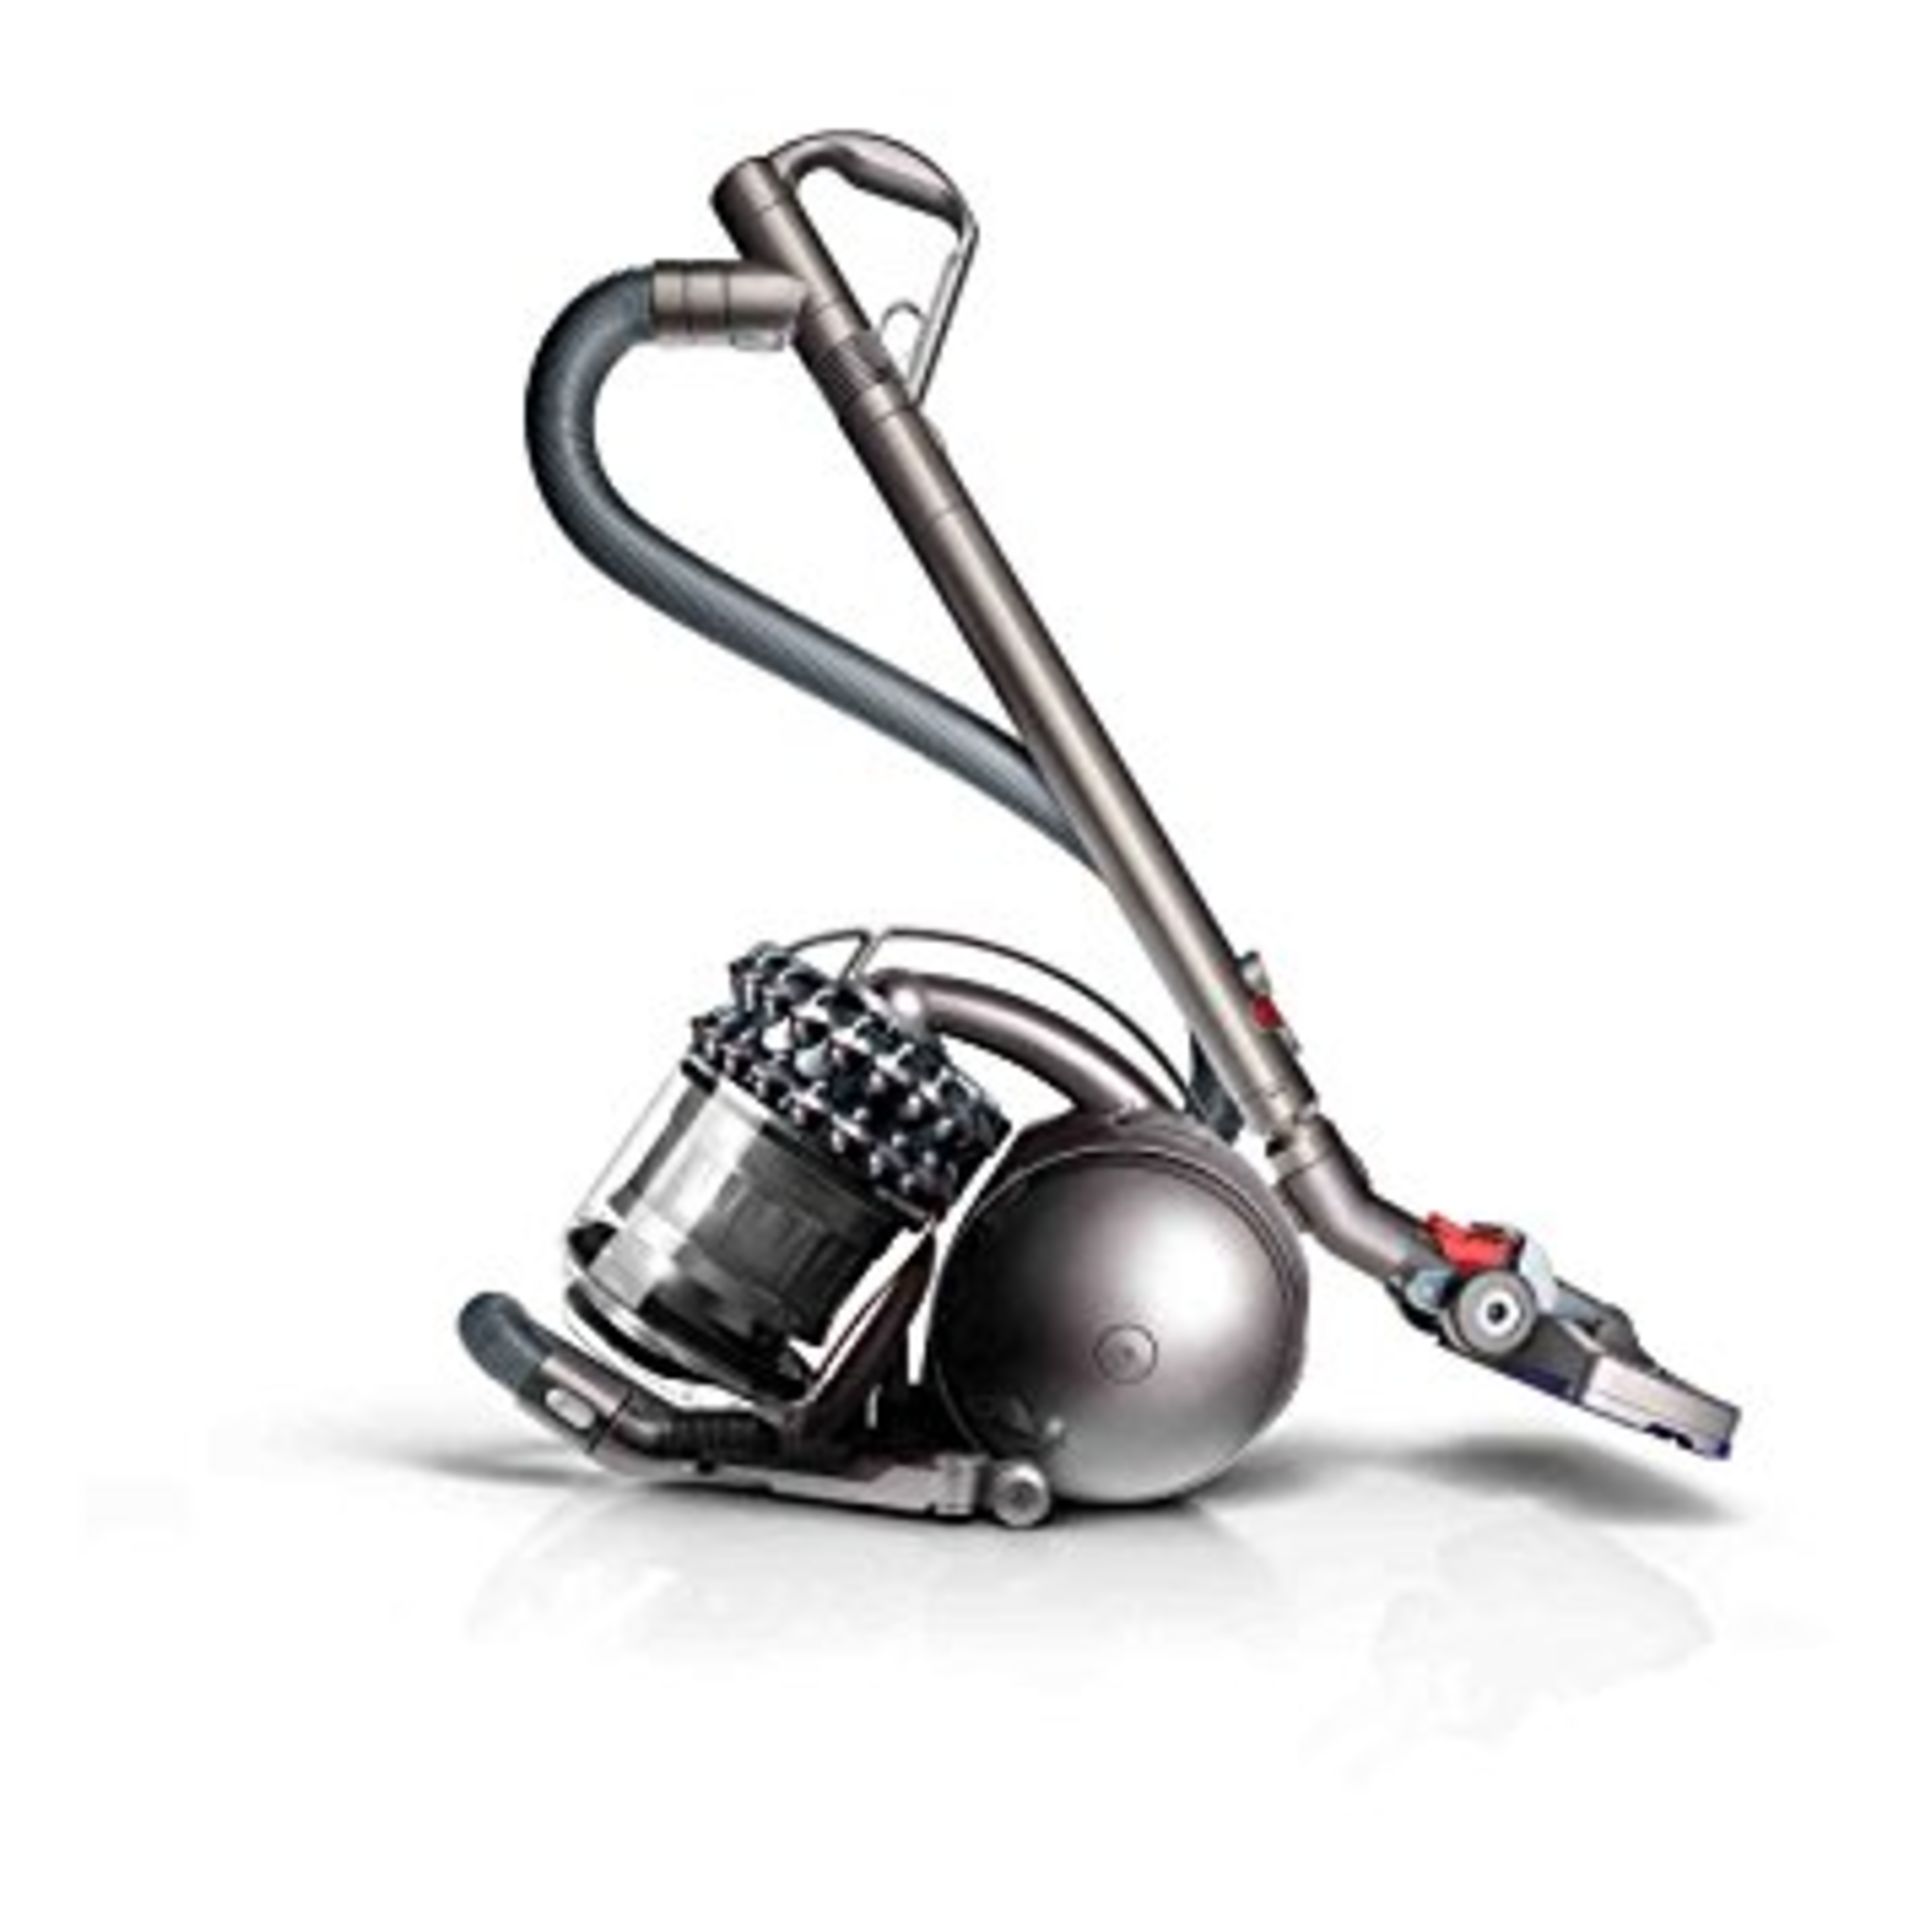 V Brand New Dyson DC54 Animal Extra Cylinder Bagless Vacuum Cleaner - Amazon Price £479.00 -